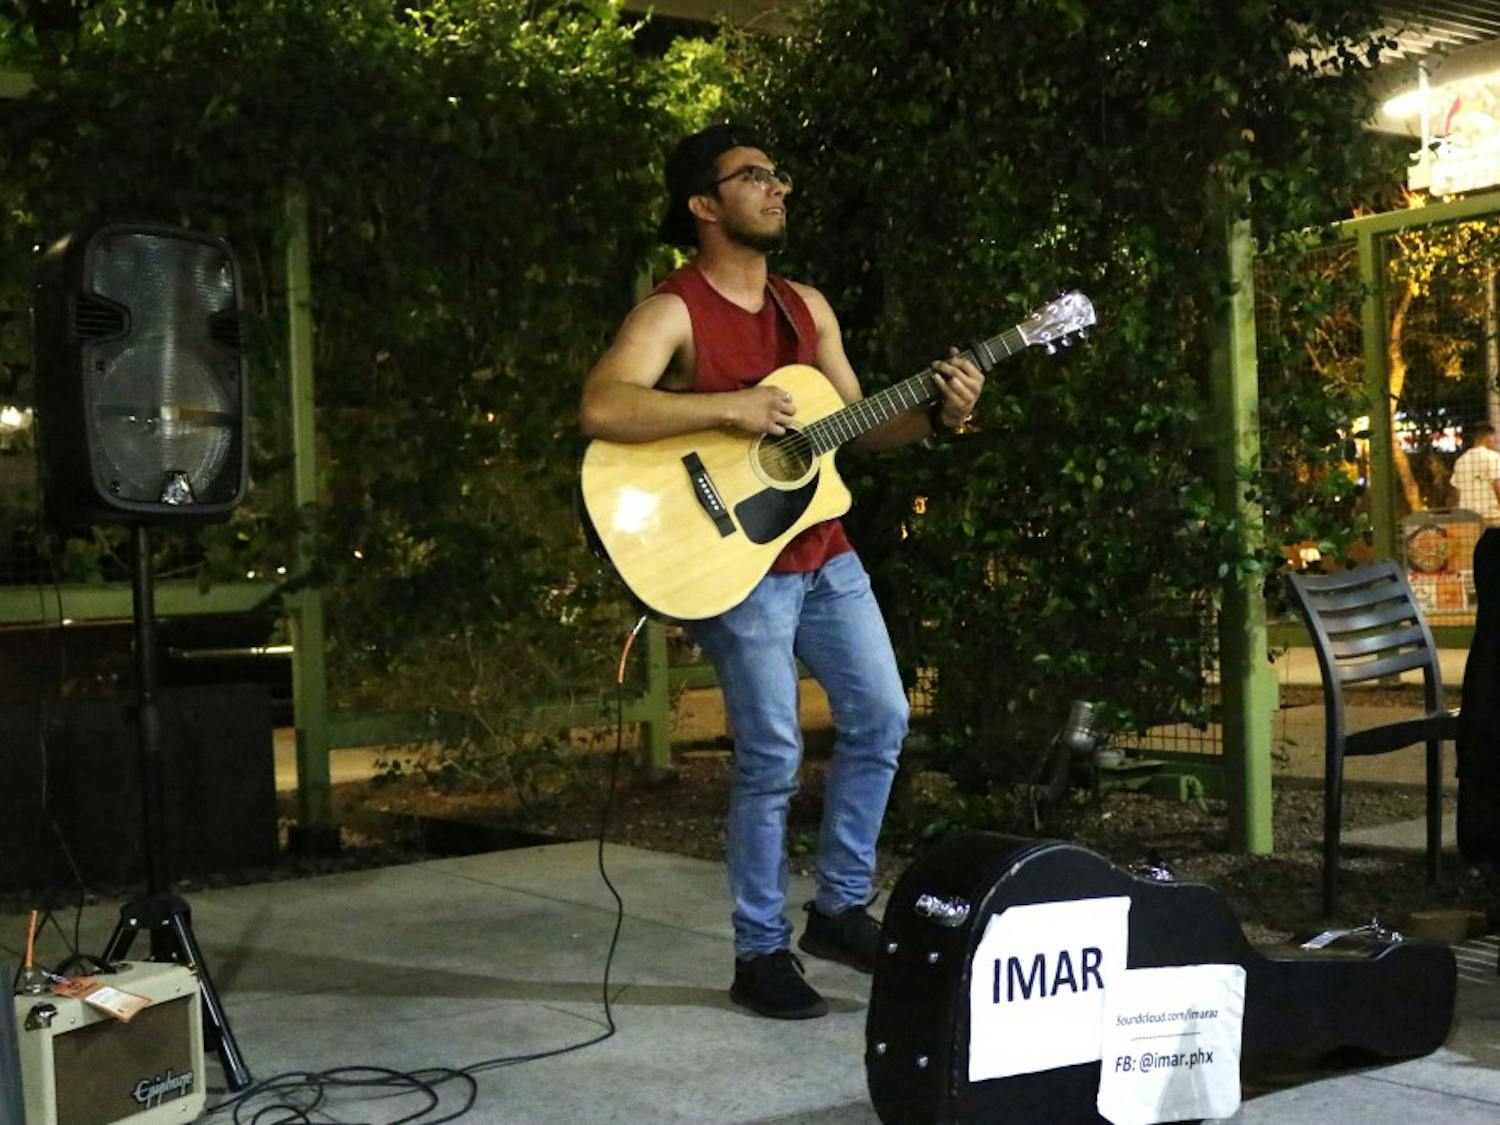 ASU communications junior Andres “Imar” Rosales performs covers of Pumped Up Kicks and Sweater Weather at The Heart of an Artist open mic night at the downtown campus on Tuesday, March 21, 2017.